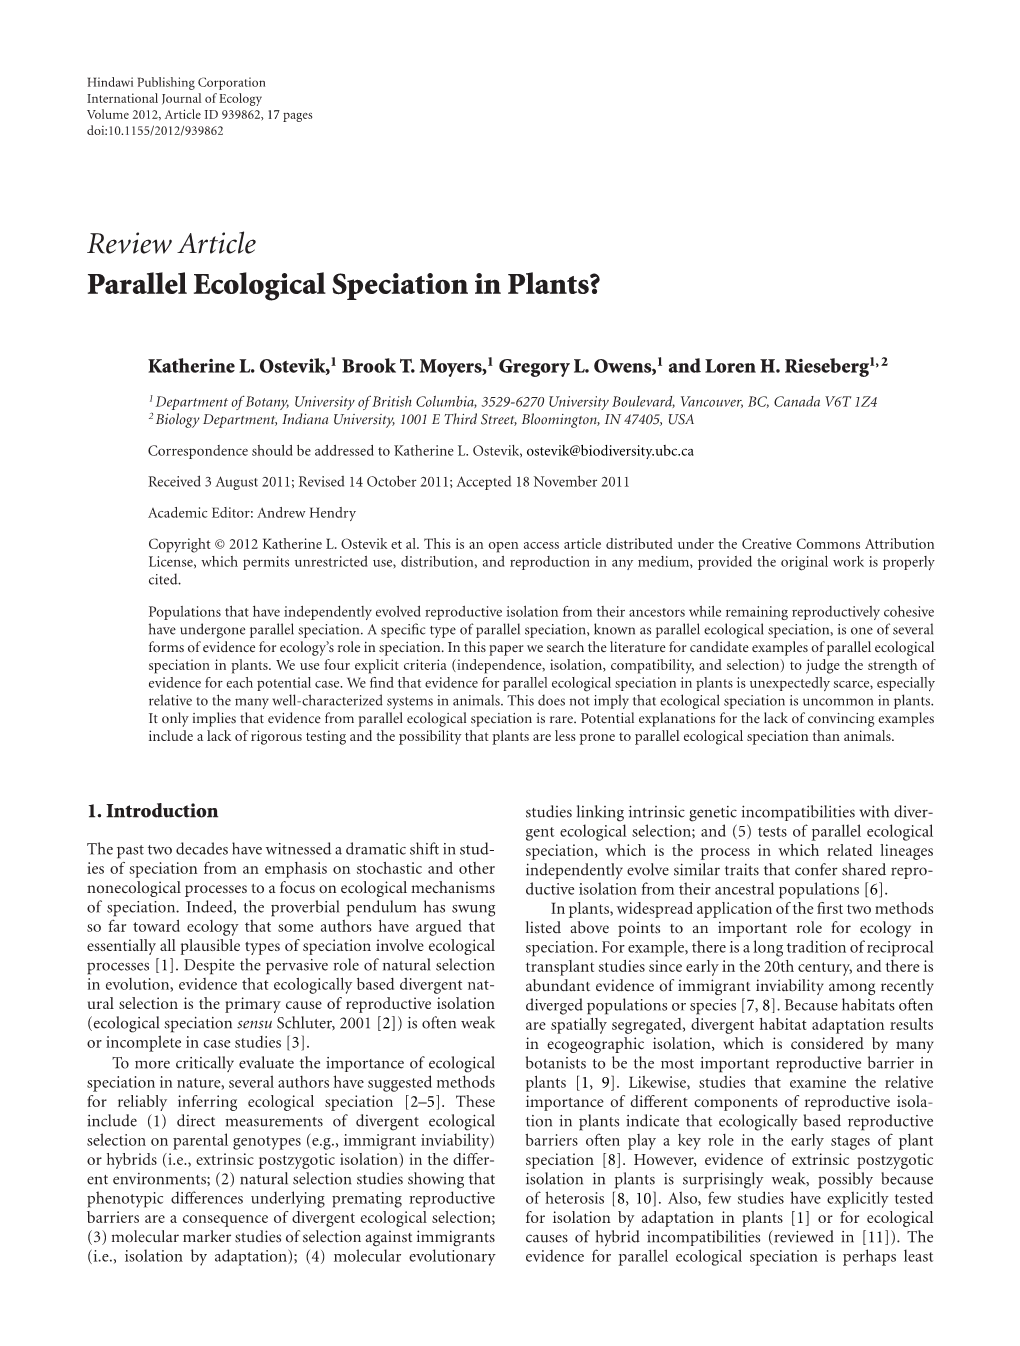 Parallel Ecological Speciation in Plants?